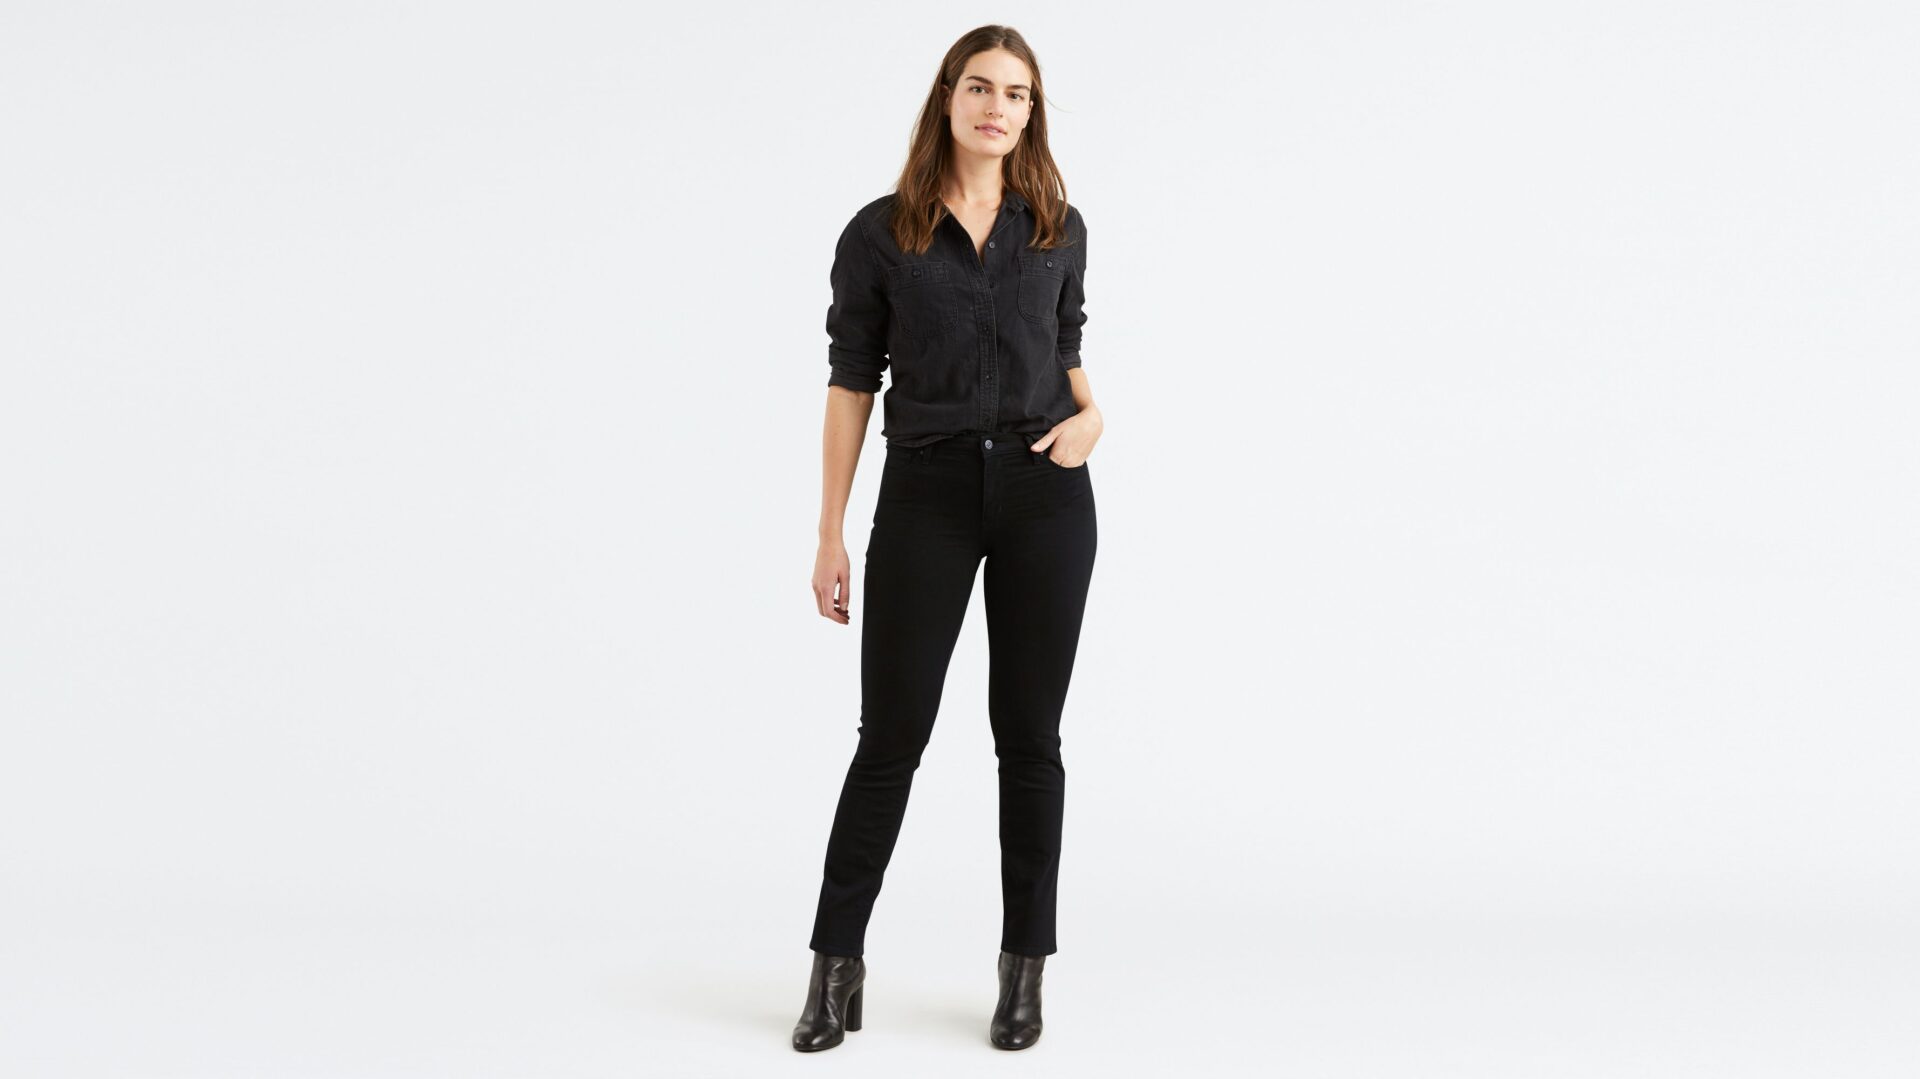 LEVIS 712 SLIM - NIGHT IS BLACK 18884-0001 - Barbopoulos store, Chania